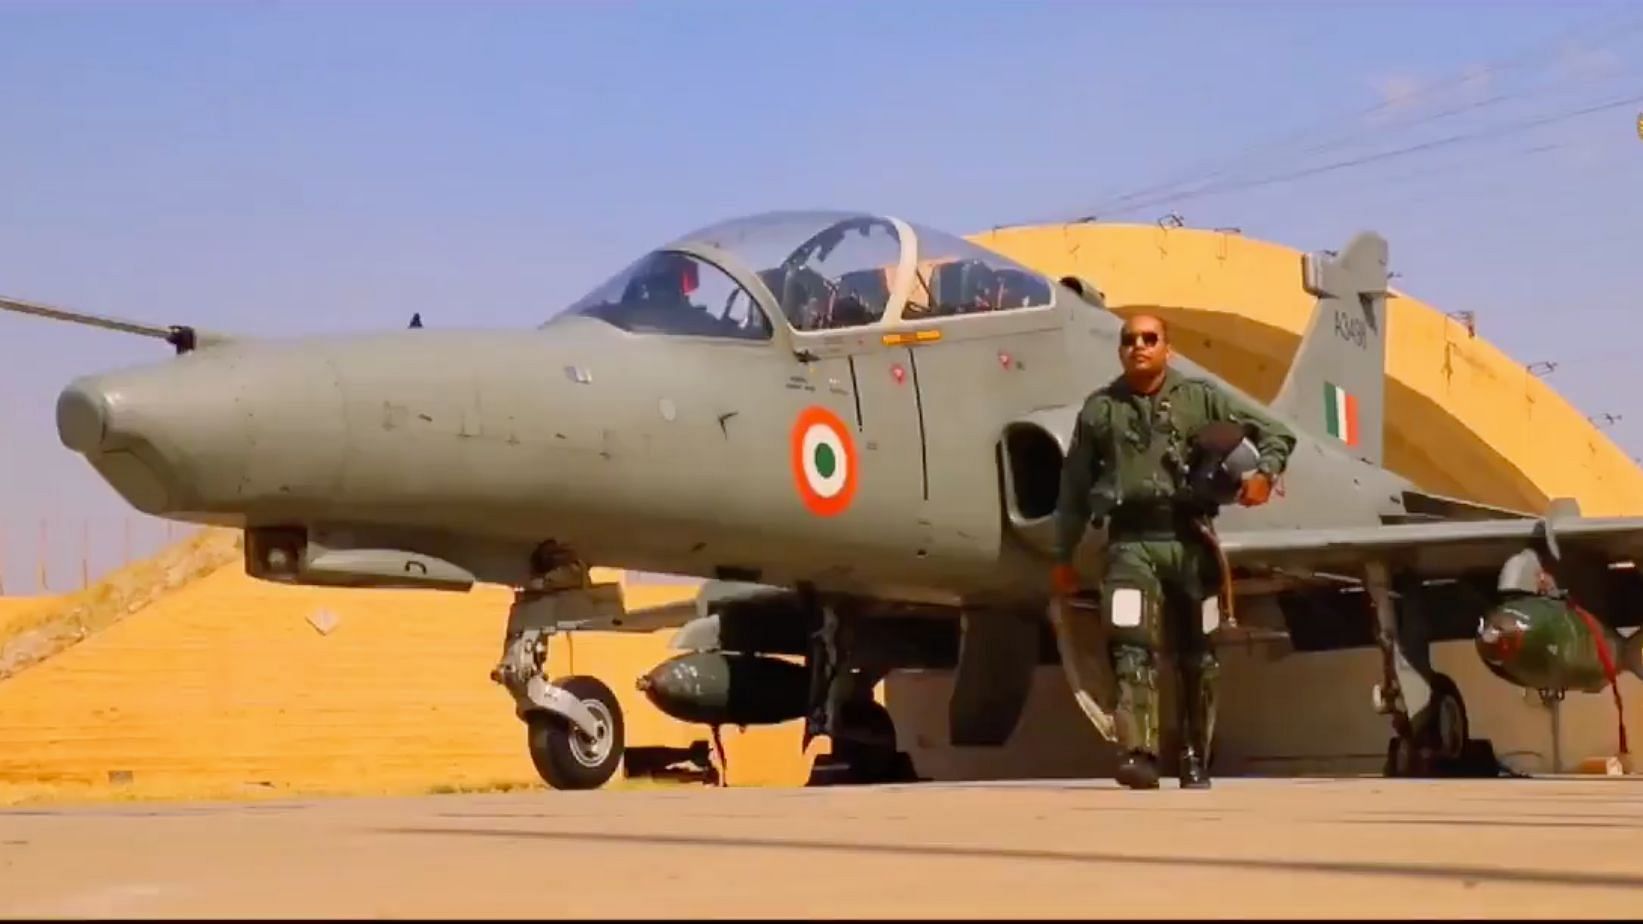 The clip contains footage of operations undertaken by IAF and the background score heightens the patriotic content.